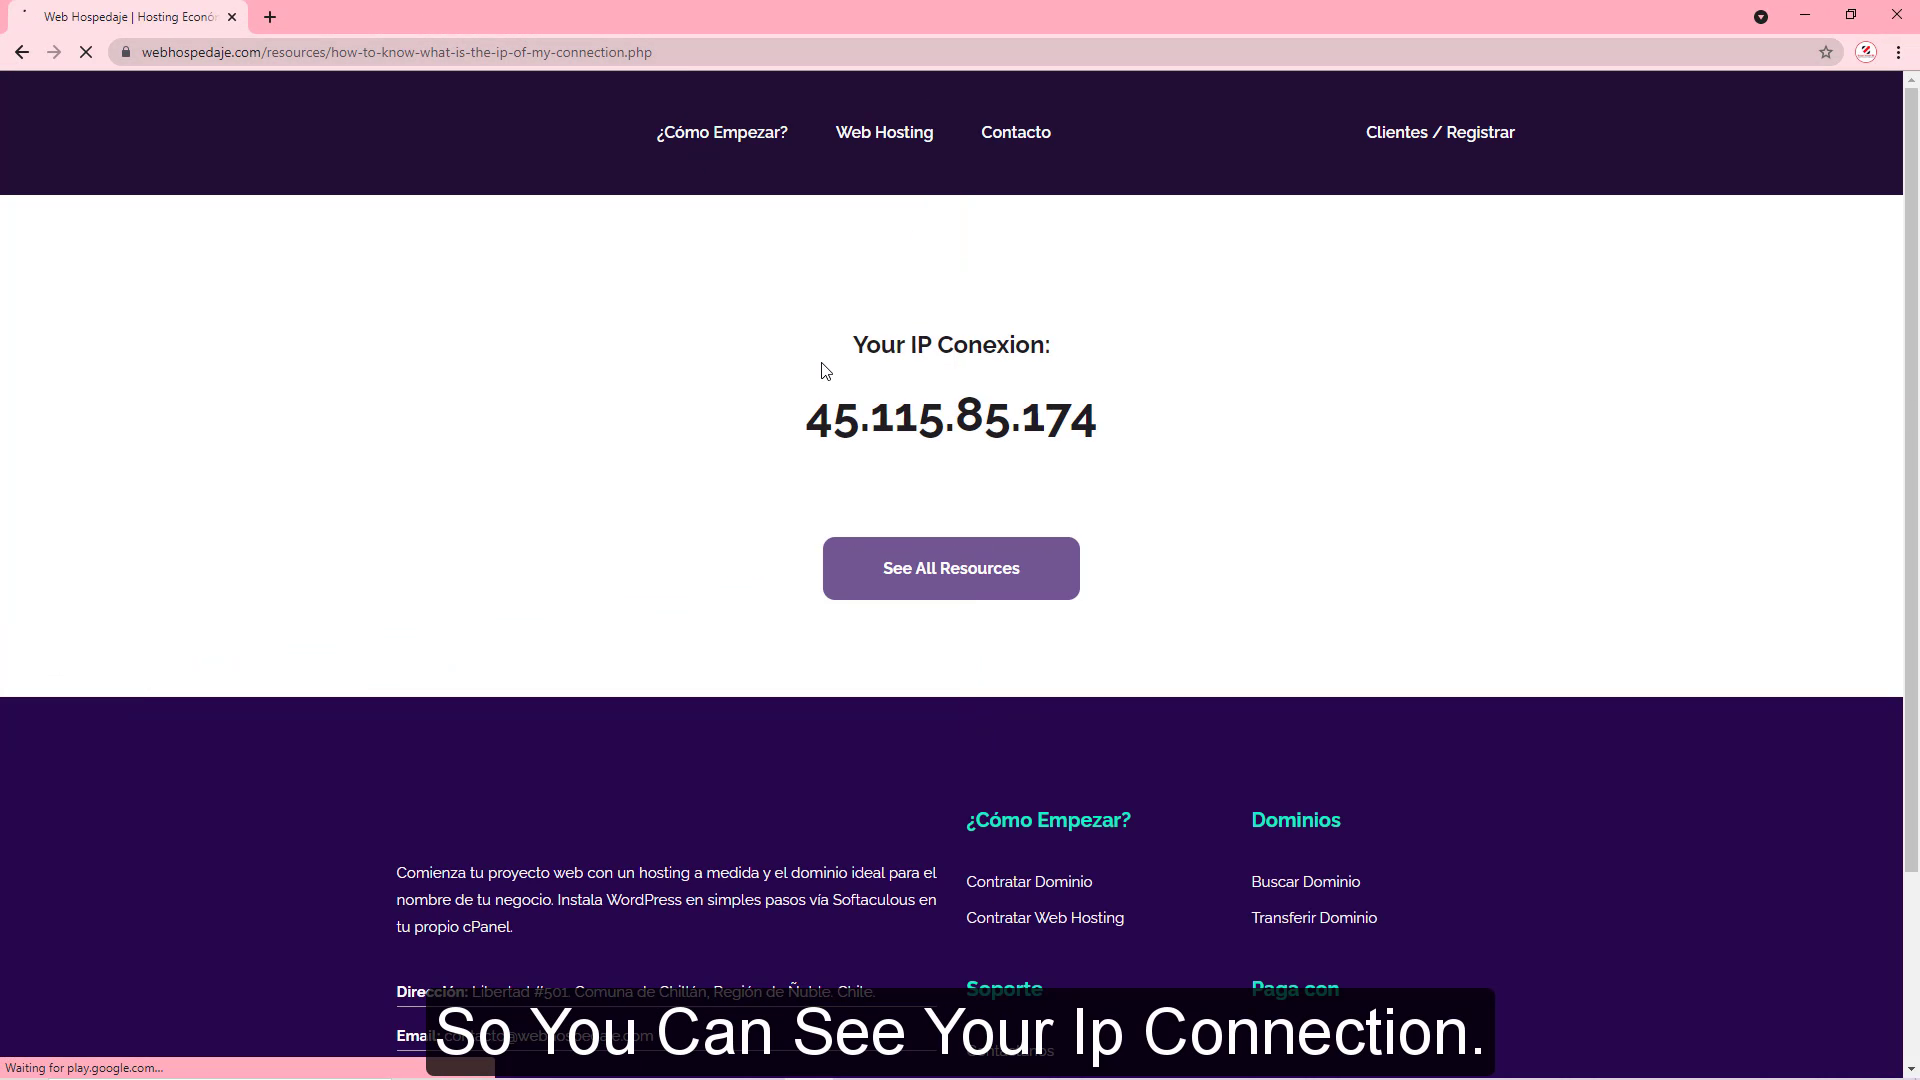  So You Can See Your Ip Connection.